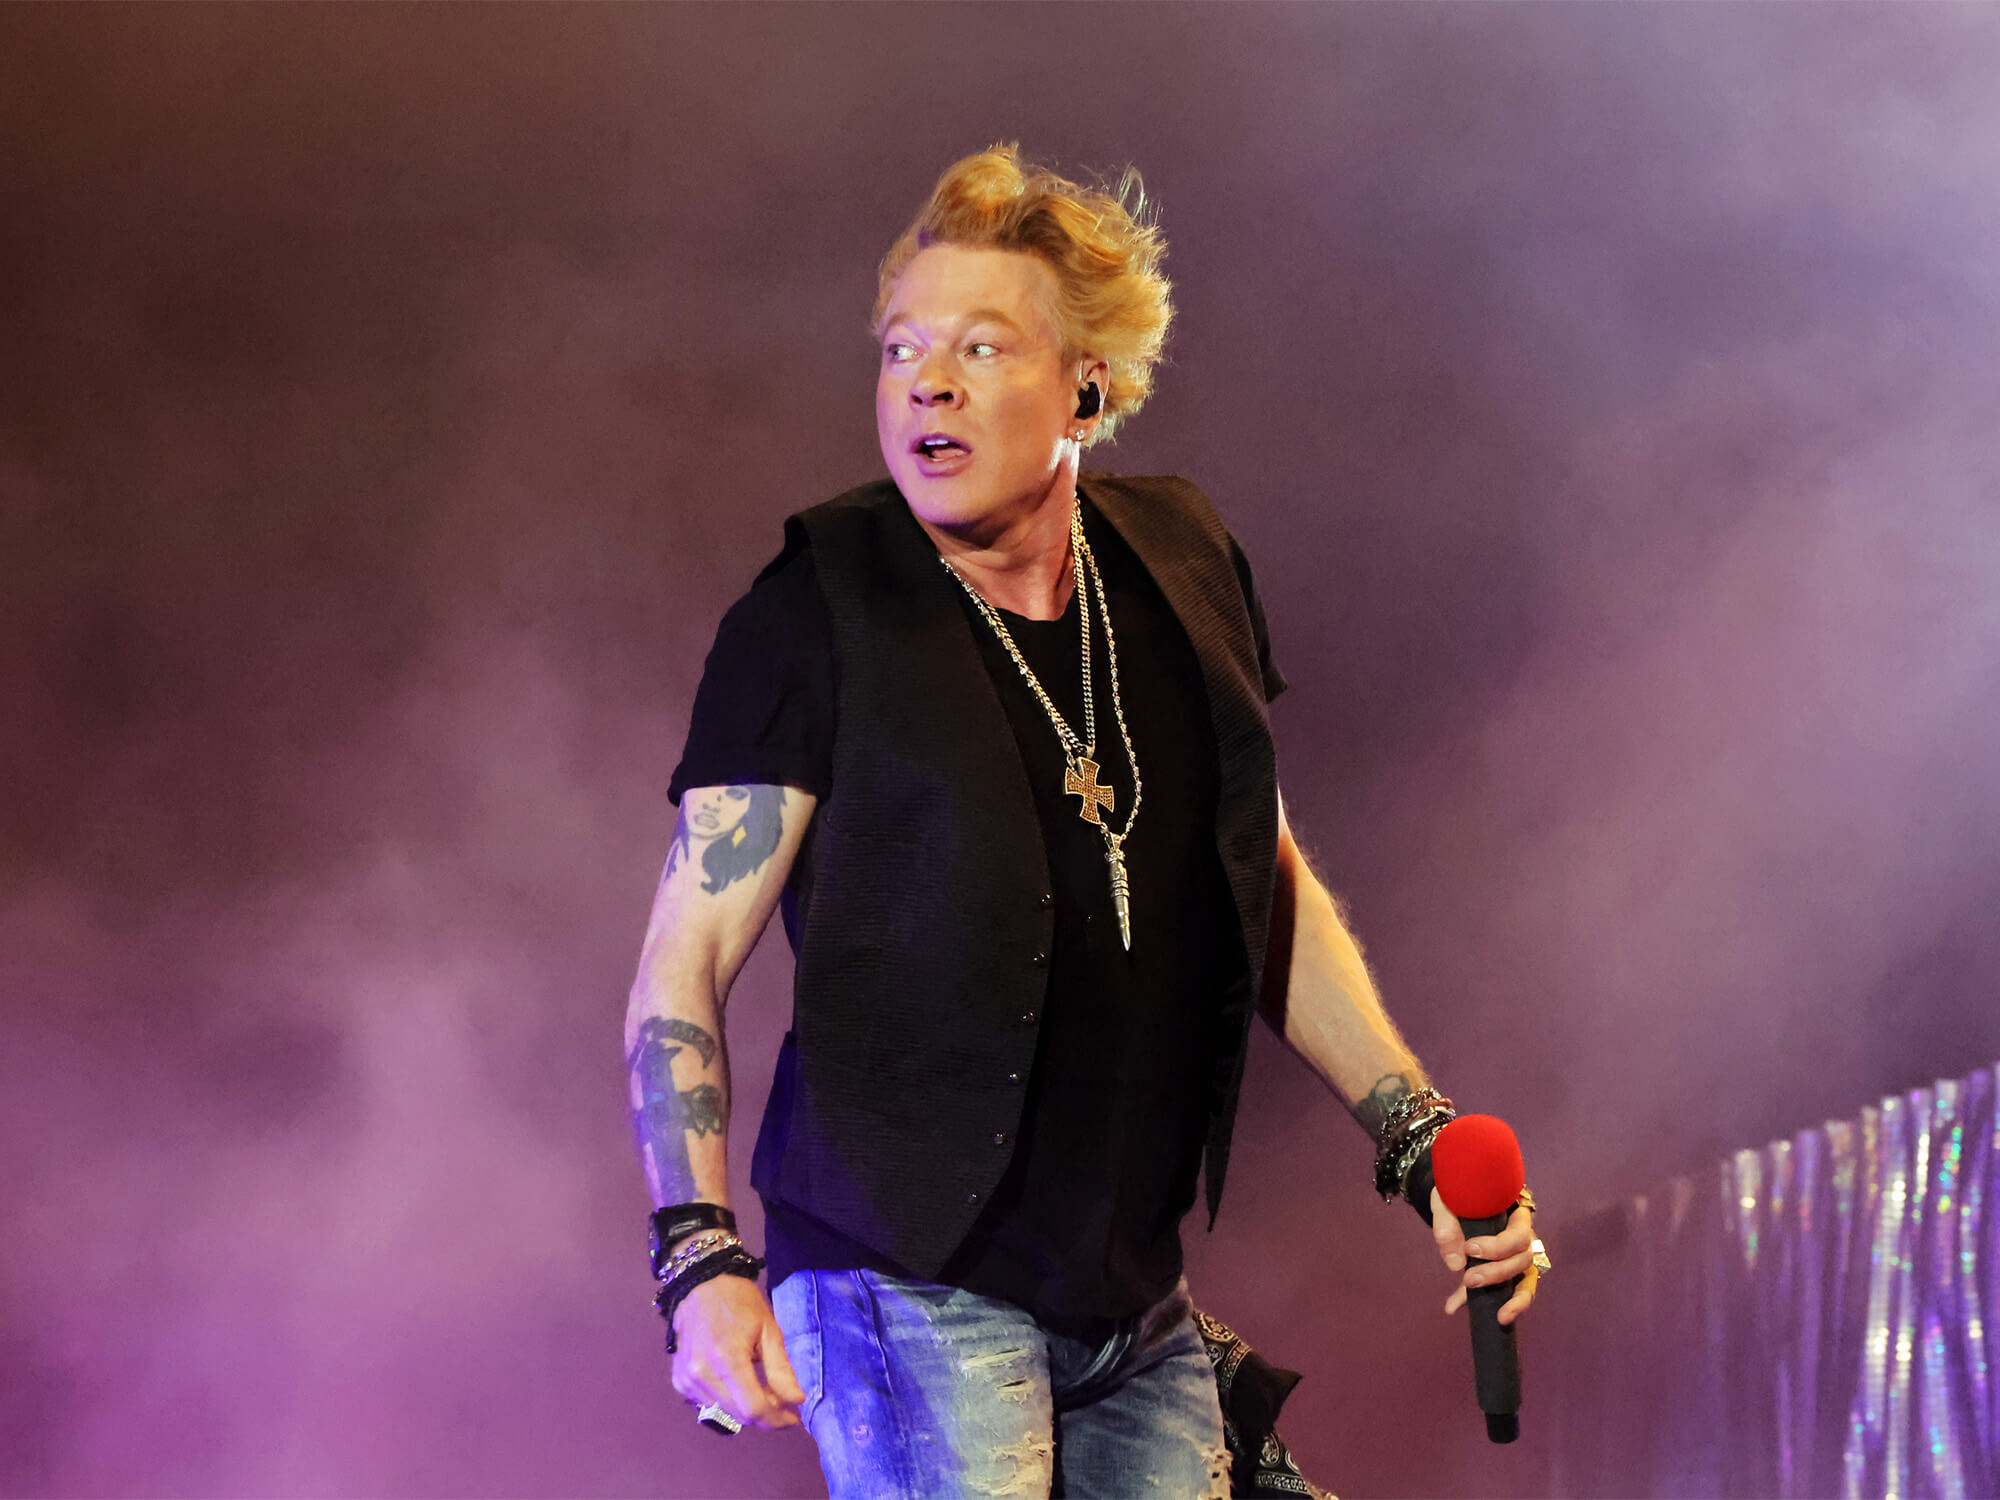 axl-rose-faces-lawsuit-alleging-sexual-assault-by-former-penthouse-model